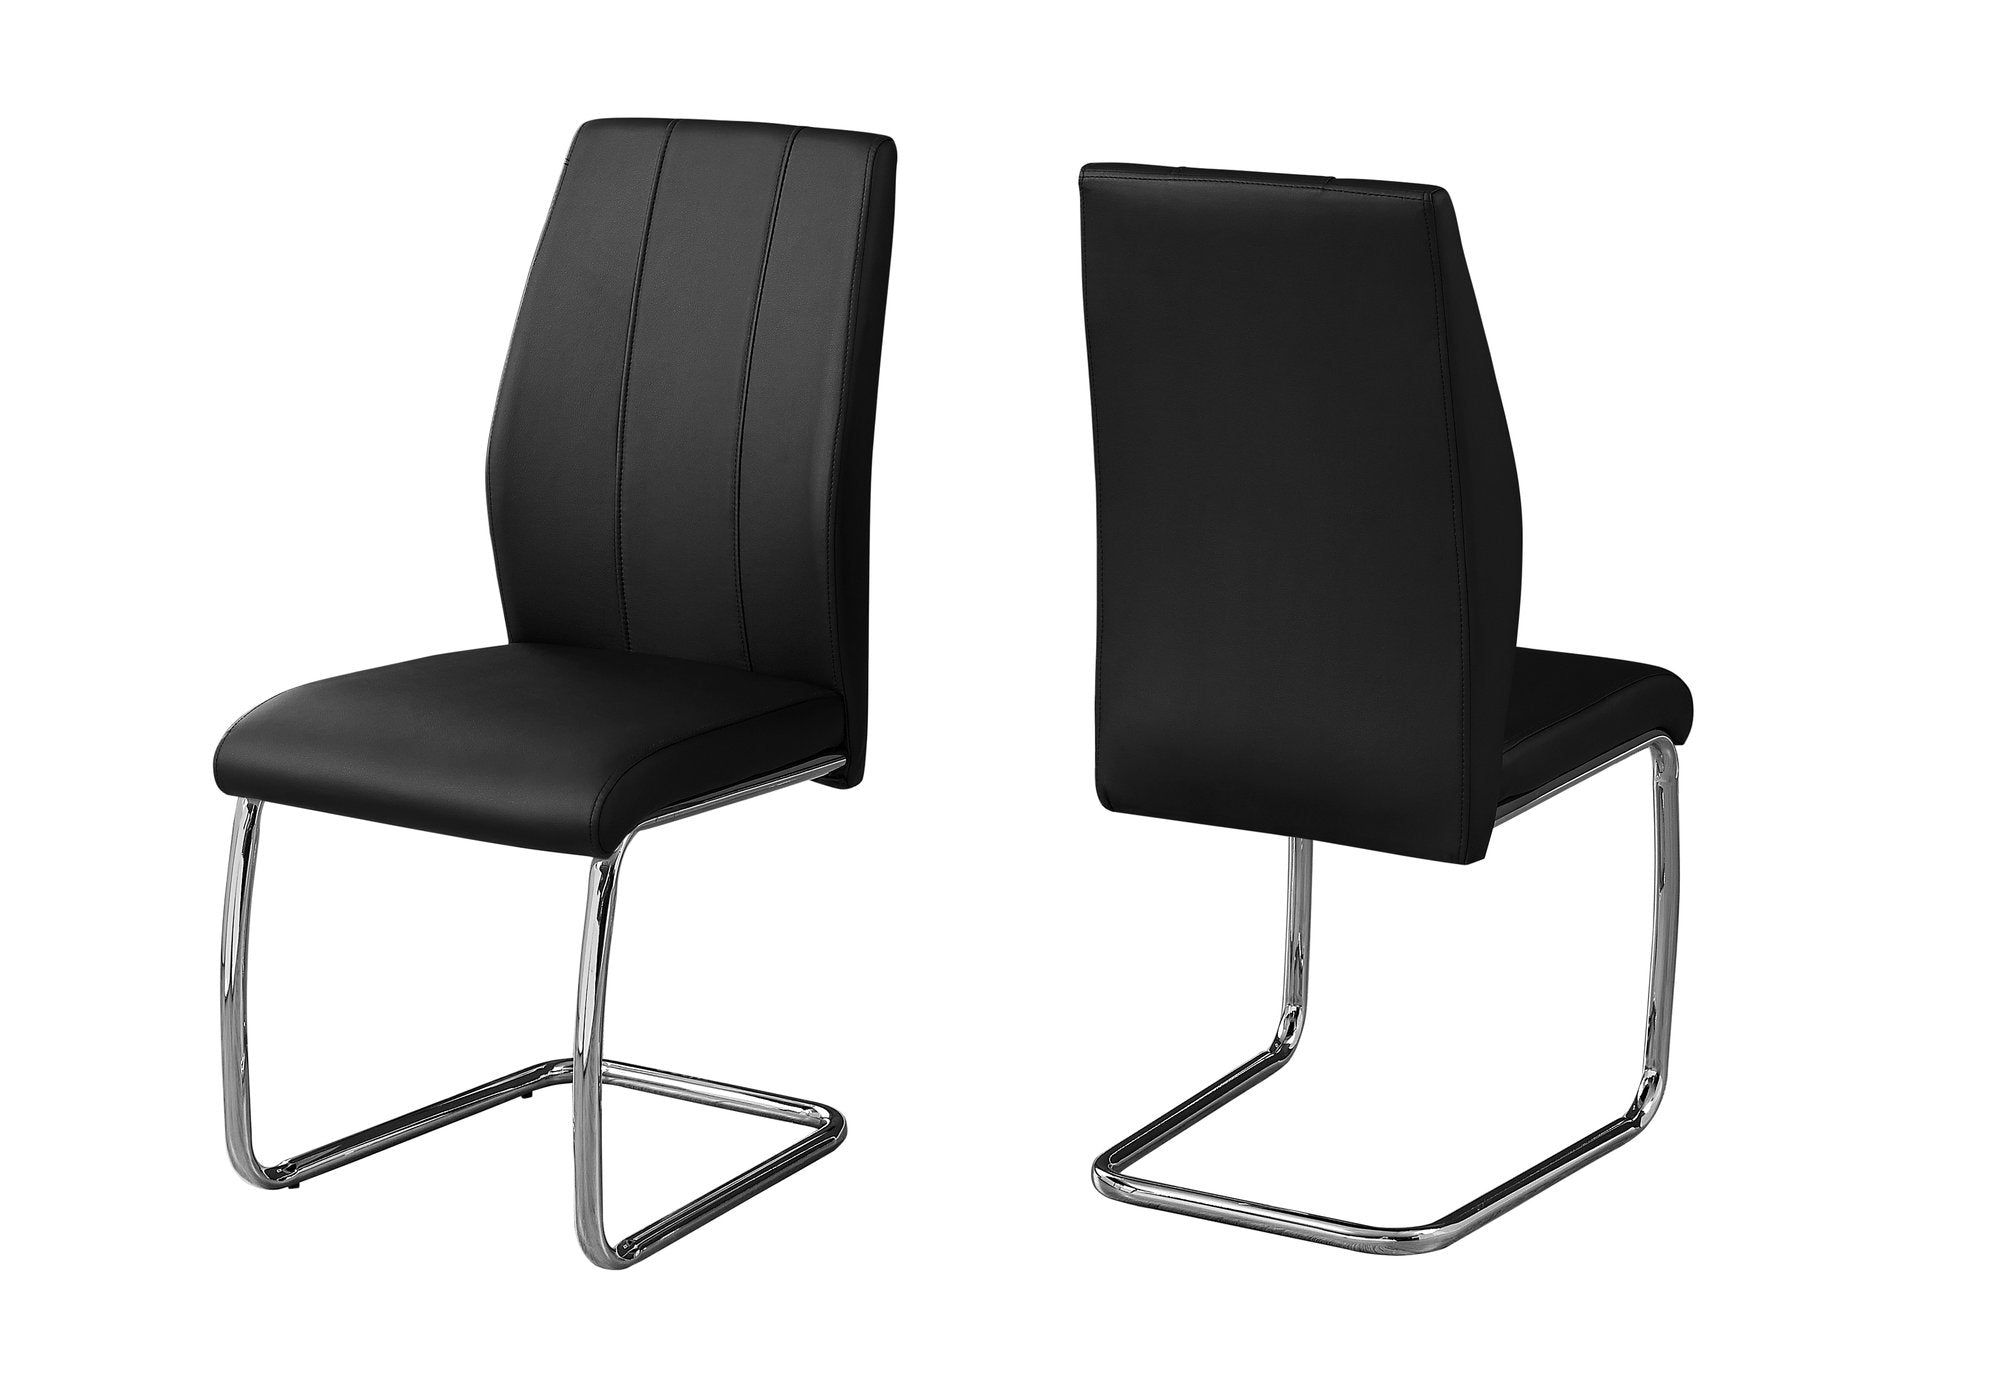 Wyne Leather Dining Chair (Set of 2 - Black)